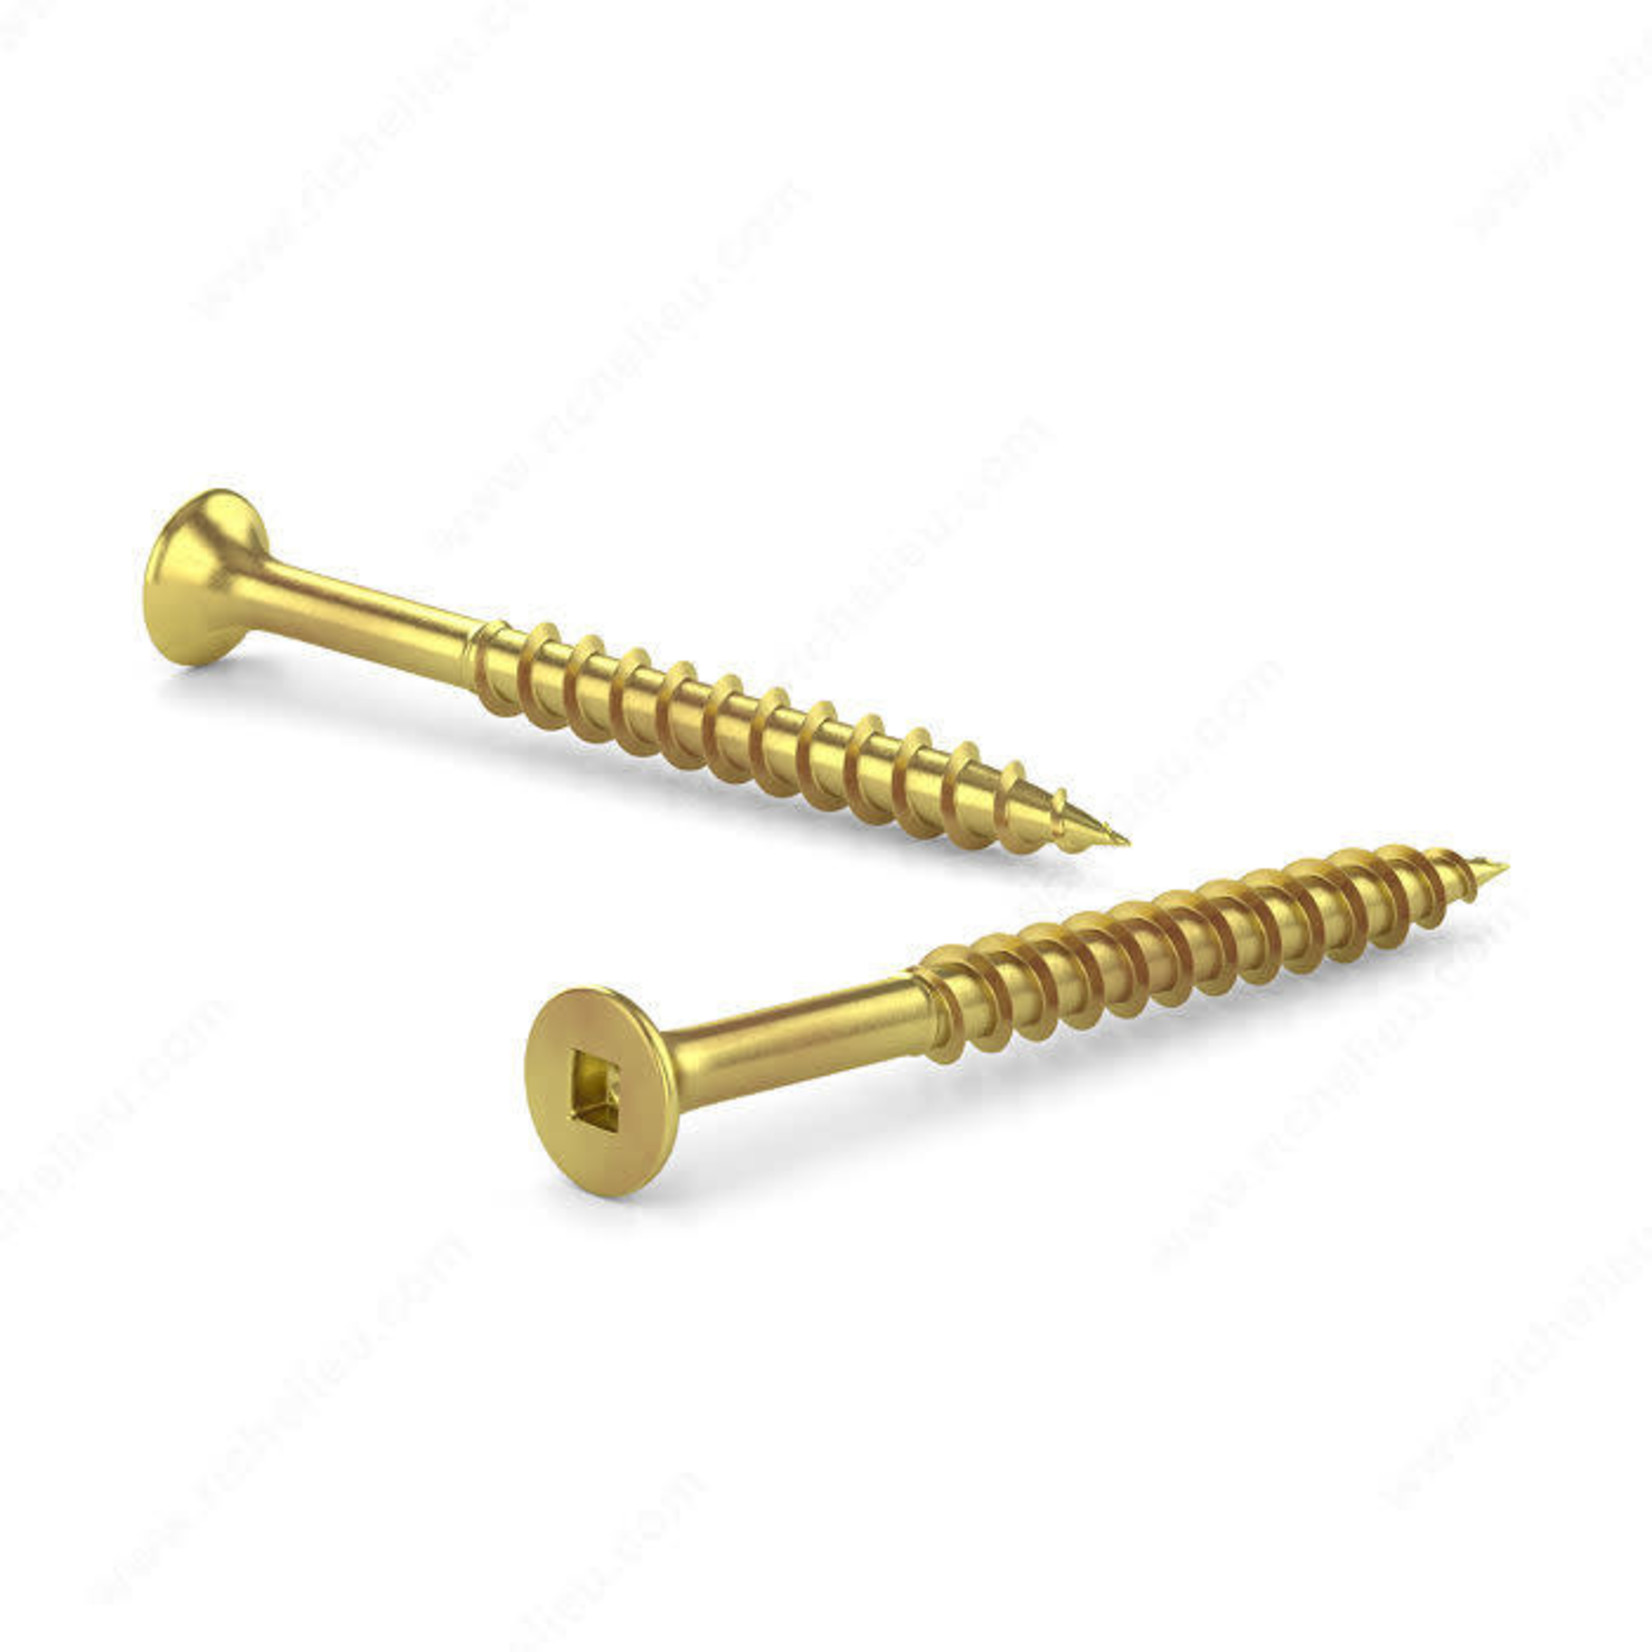 RELIABLE ALL PURPOSE YELLOW ZINC SCREW, #8 2IN, 4000PK